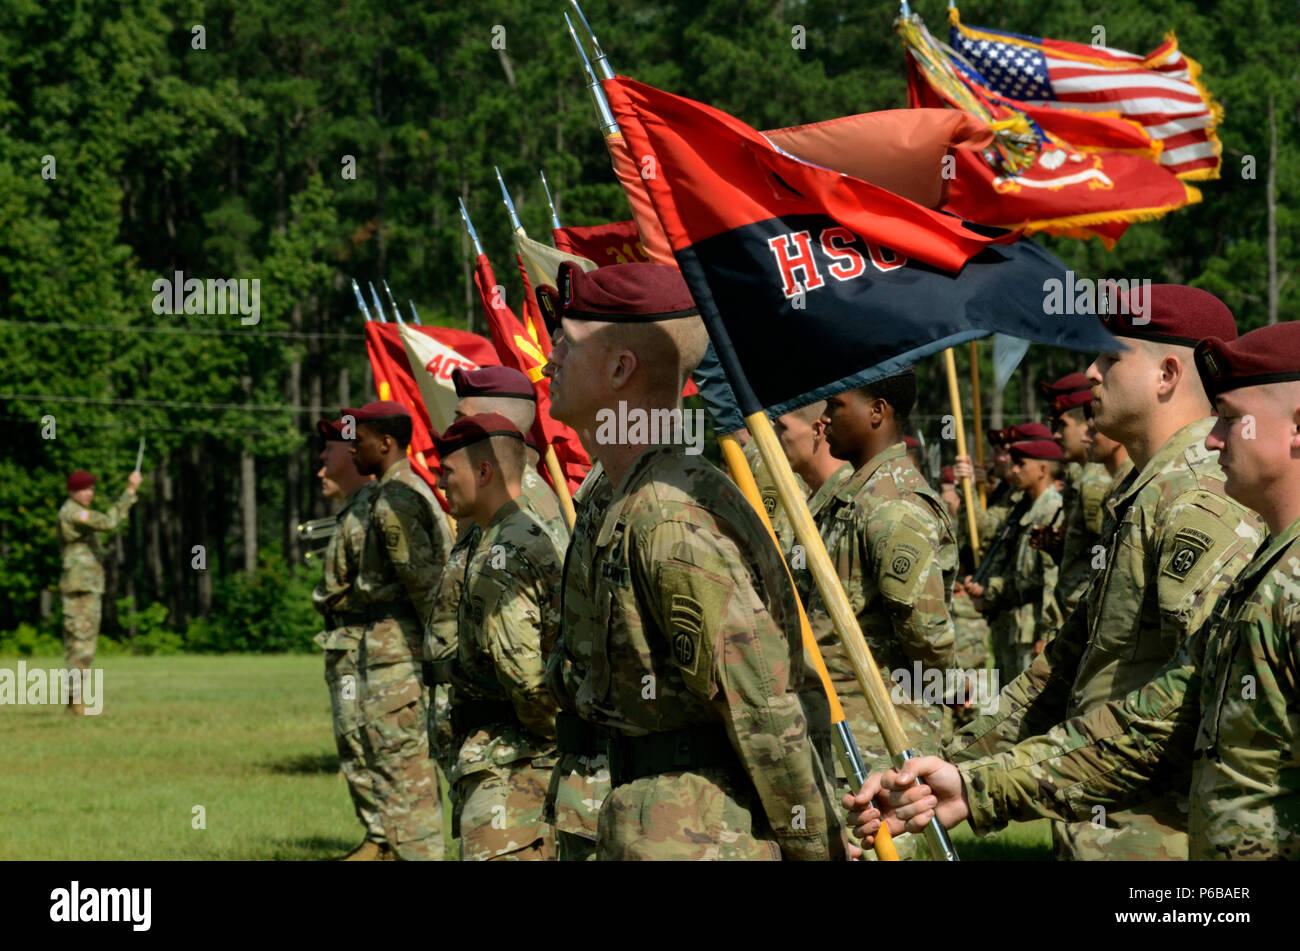 Paratroopers of the 82nd Airborne Division Artillery, 82nd Airborne Division await inspection by their new commander, Col. Joe Hilbert, during a change of command ceremony on Fort Bragg, North Carolina, June 22, 2018.  The ceremony marked the transfer of authority for the Army’s largest airborne artillery organization. (U.S. Army photo by Spc. James L. Hobbs) Stock Photo